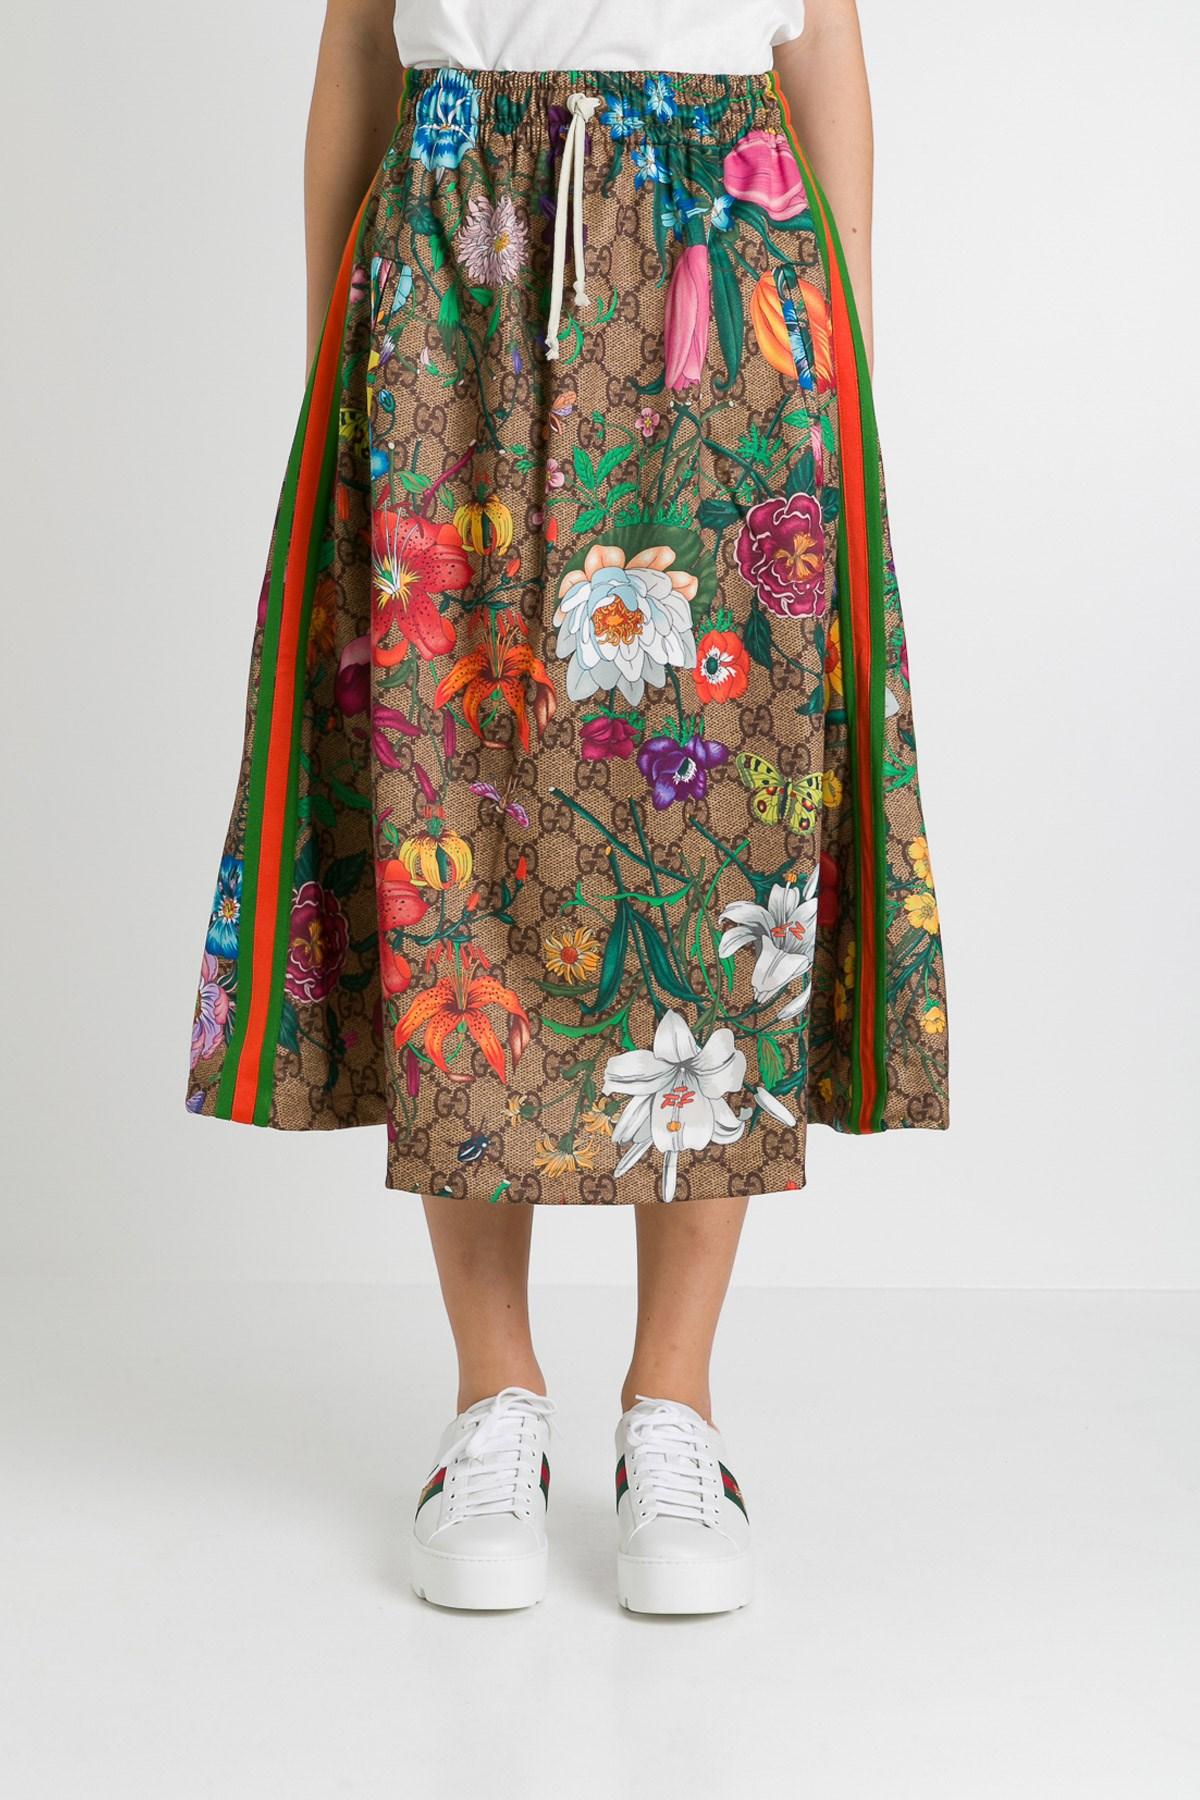 gucci floral skirt